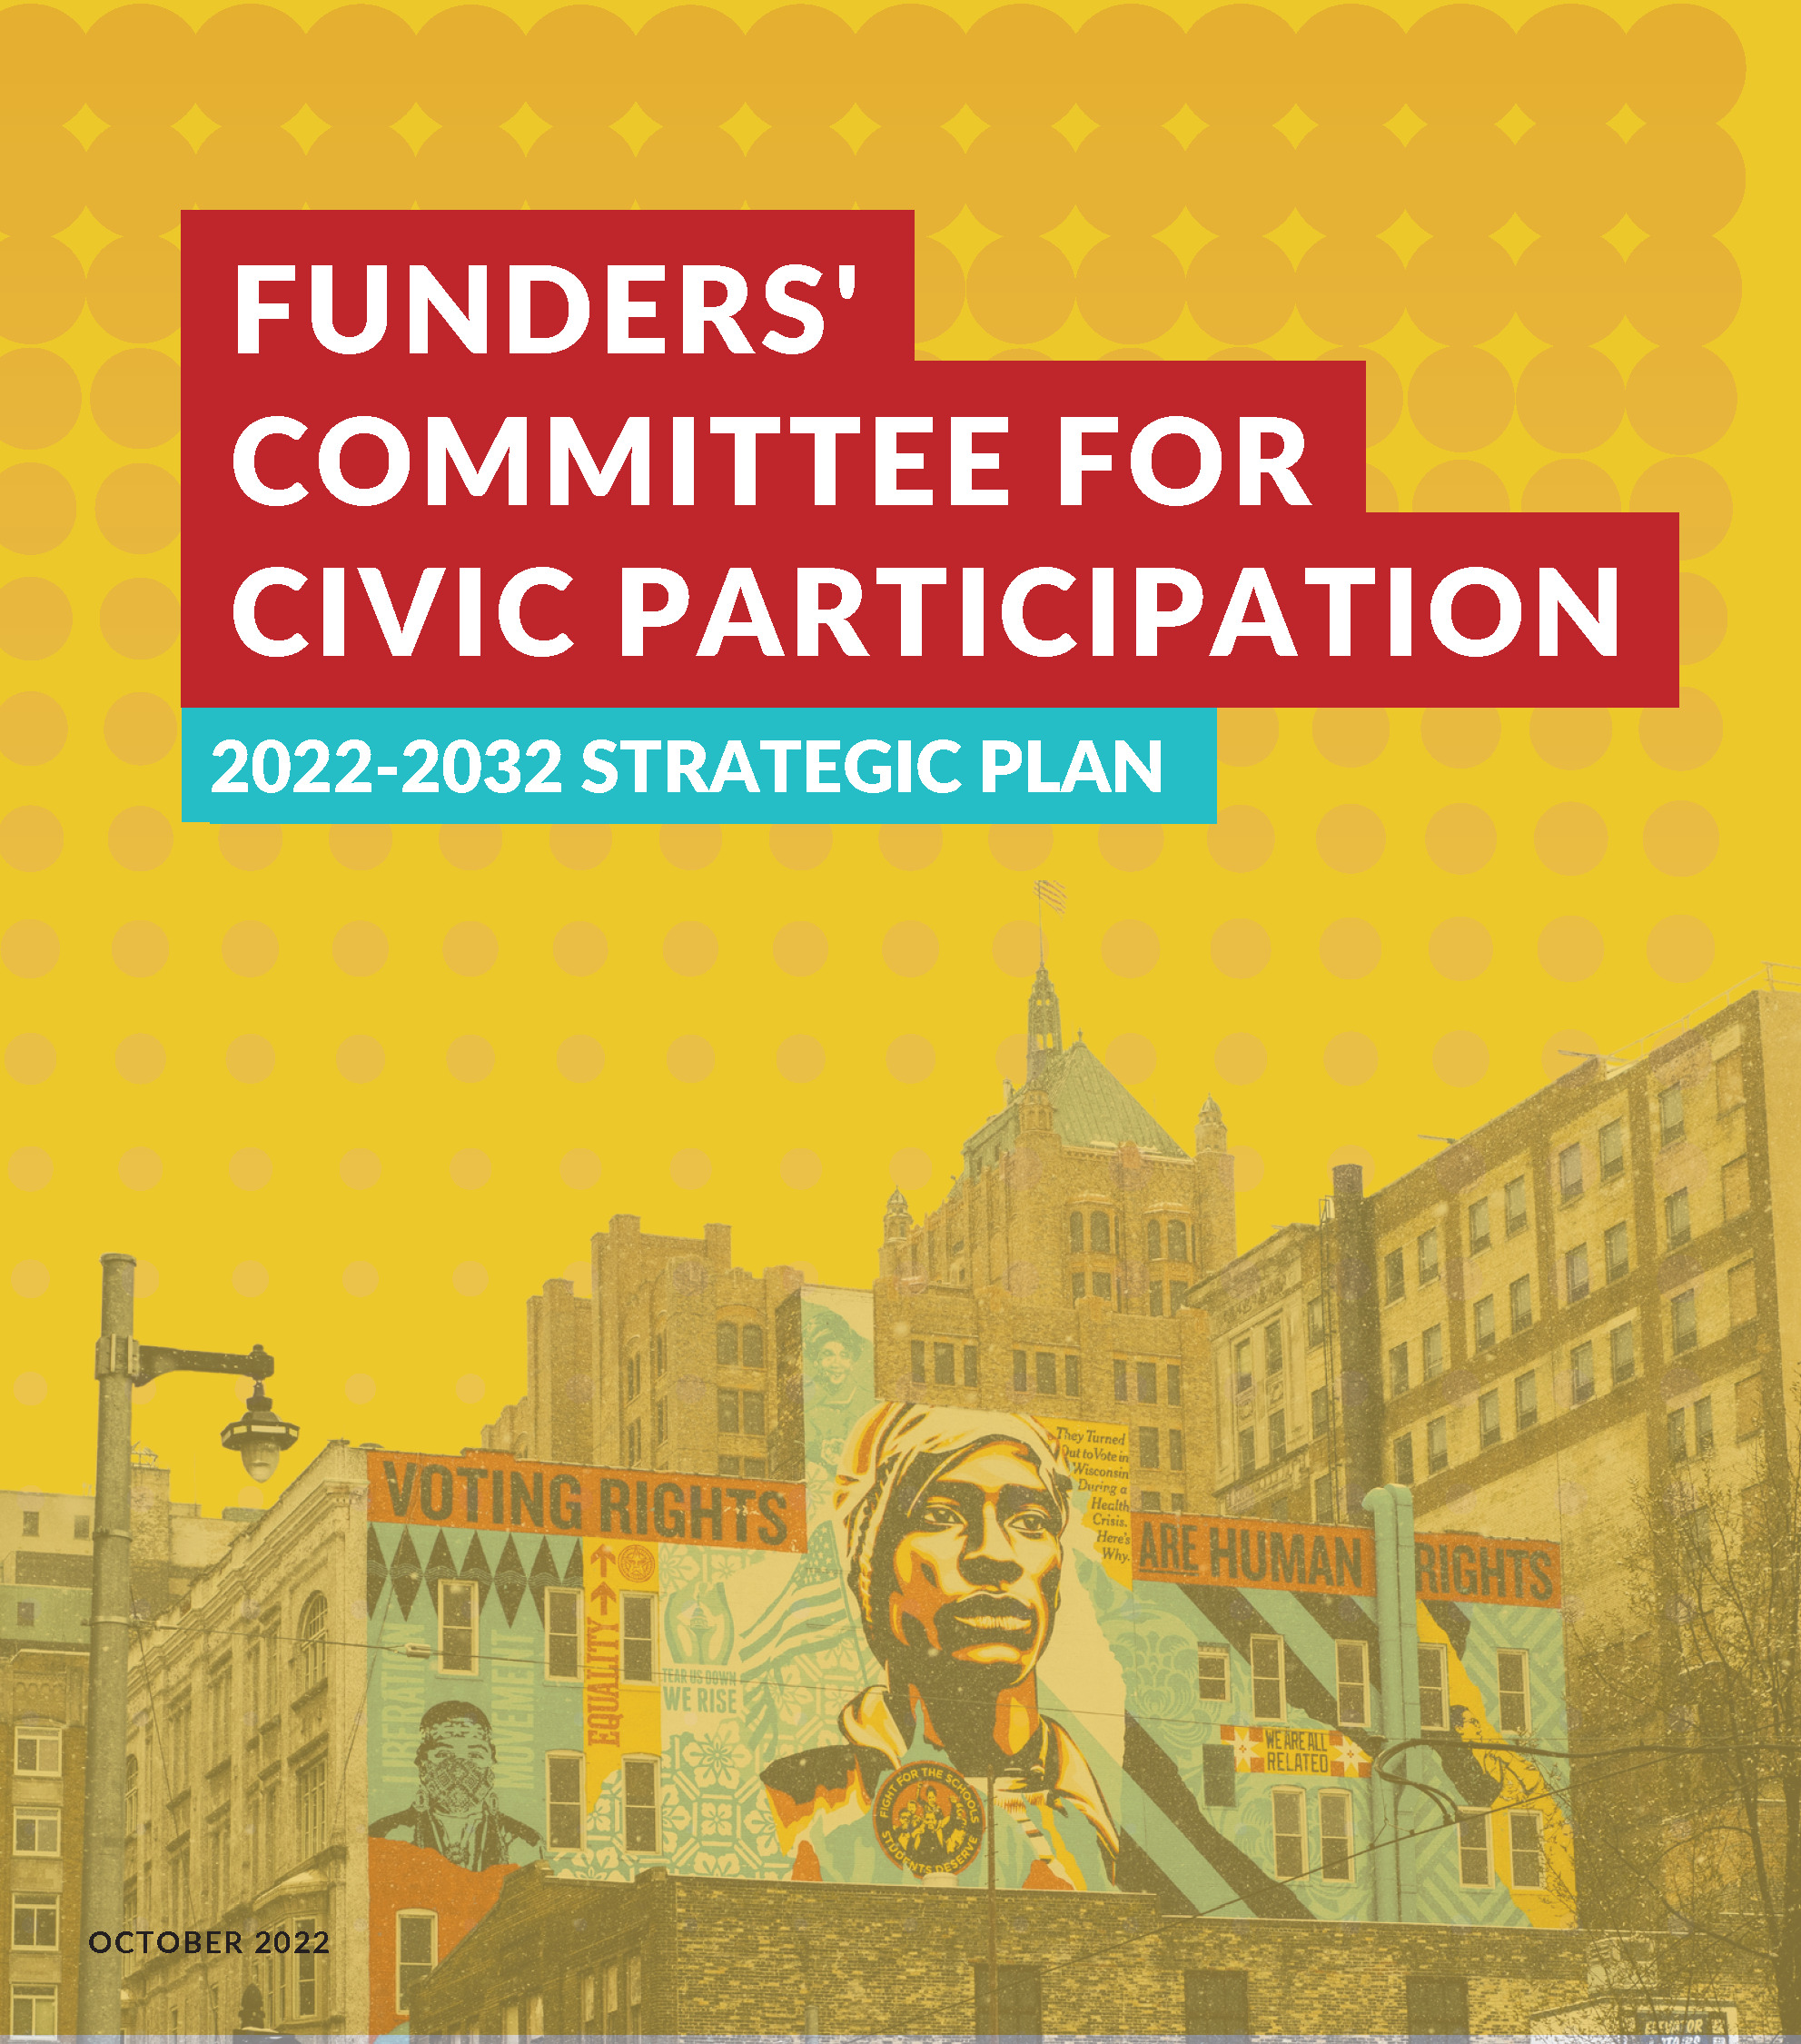 trategic Plan Cover: Image of a city block featuring a mural that says Voting Rights are Human Rights with a wash of yellow over the whole image. At the top on a red background in white it says FUNDERS' COMMITTEE FOR CIVIC PARTICIPATION, with 2022-2032 STRATEGIC PLAN on a teal background with white text below it